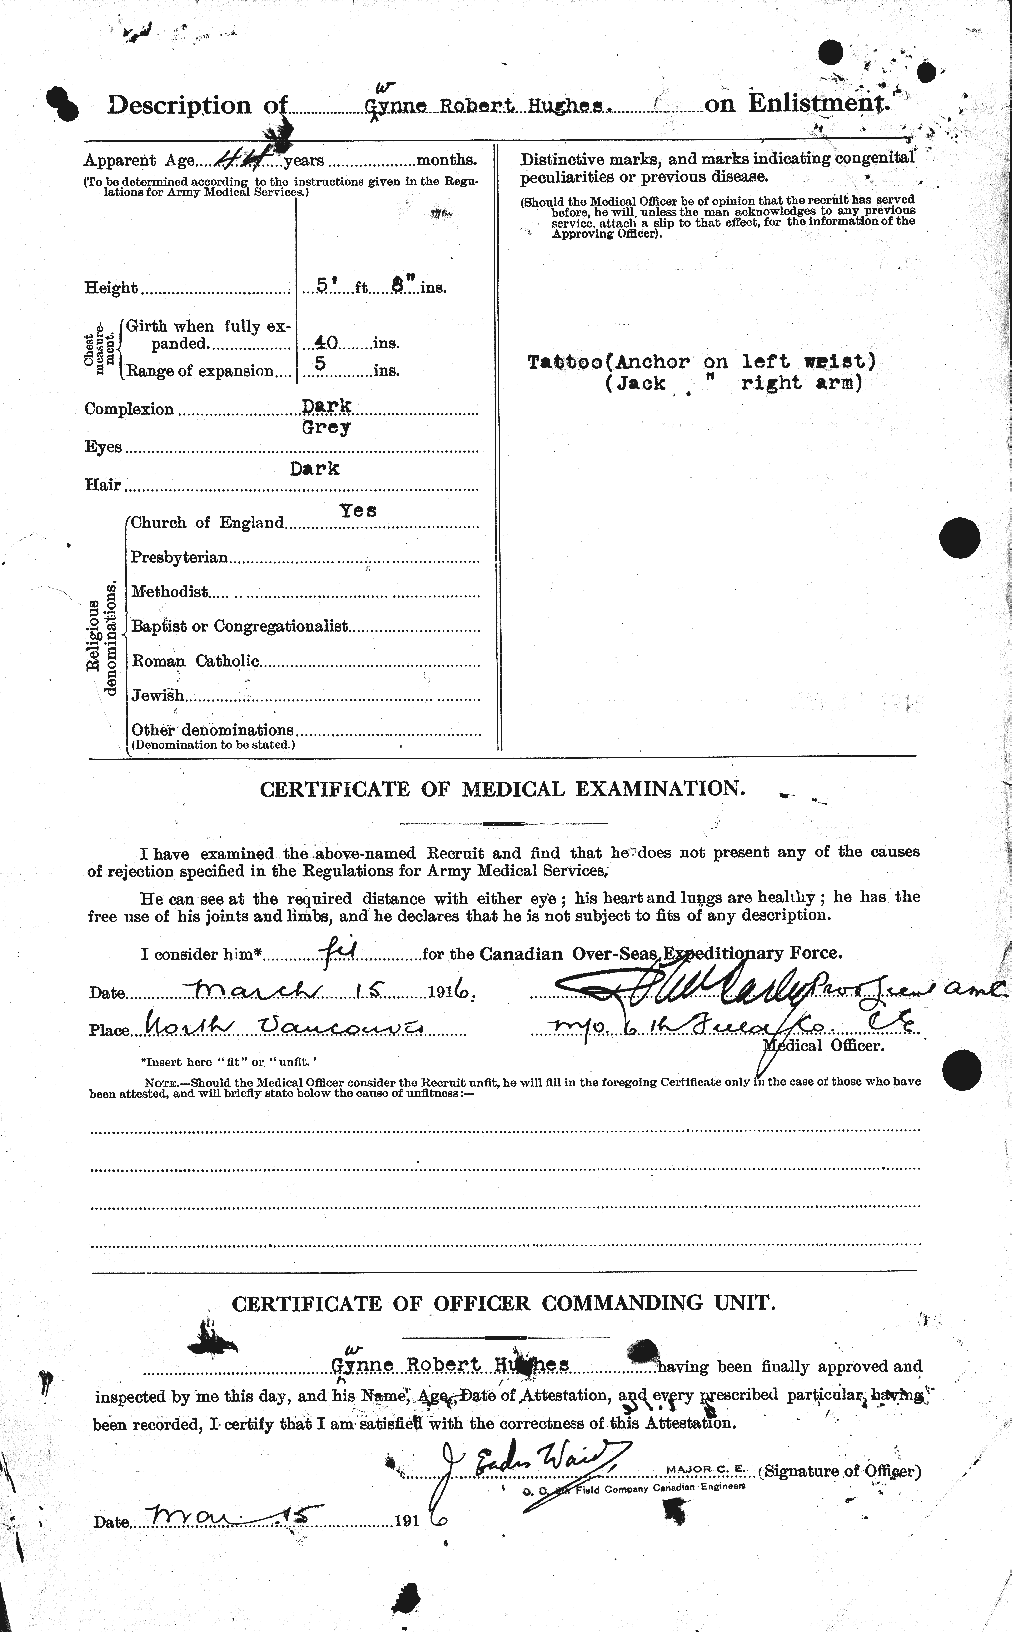 Personnel Records of the First World War - CEF 403854b